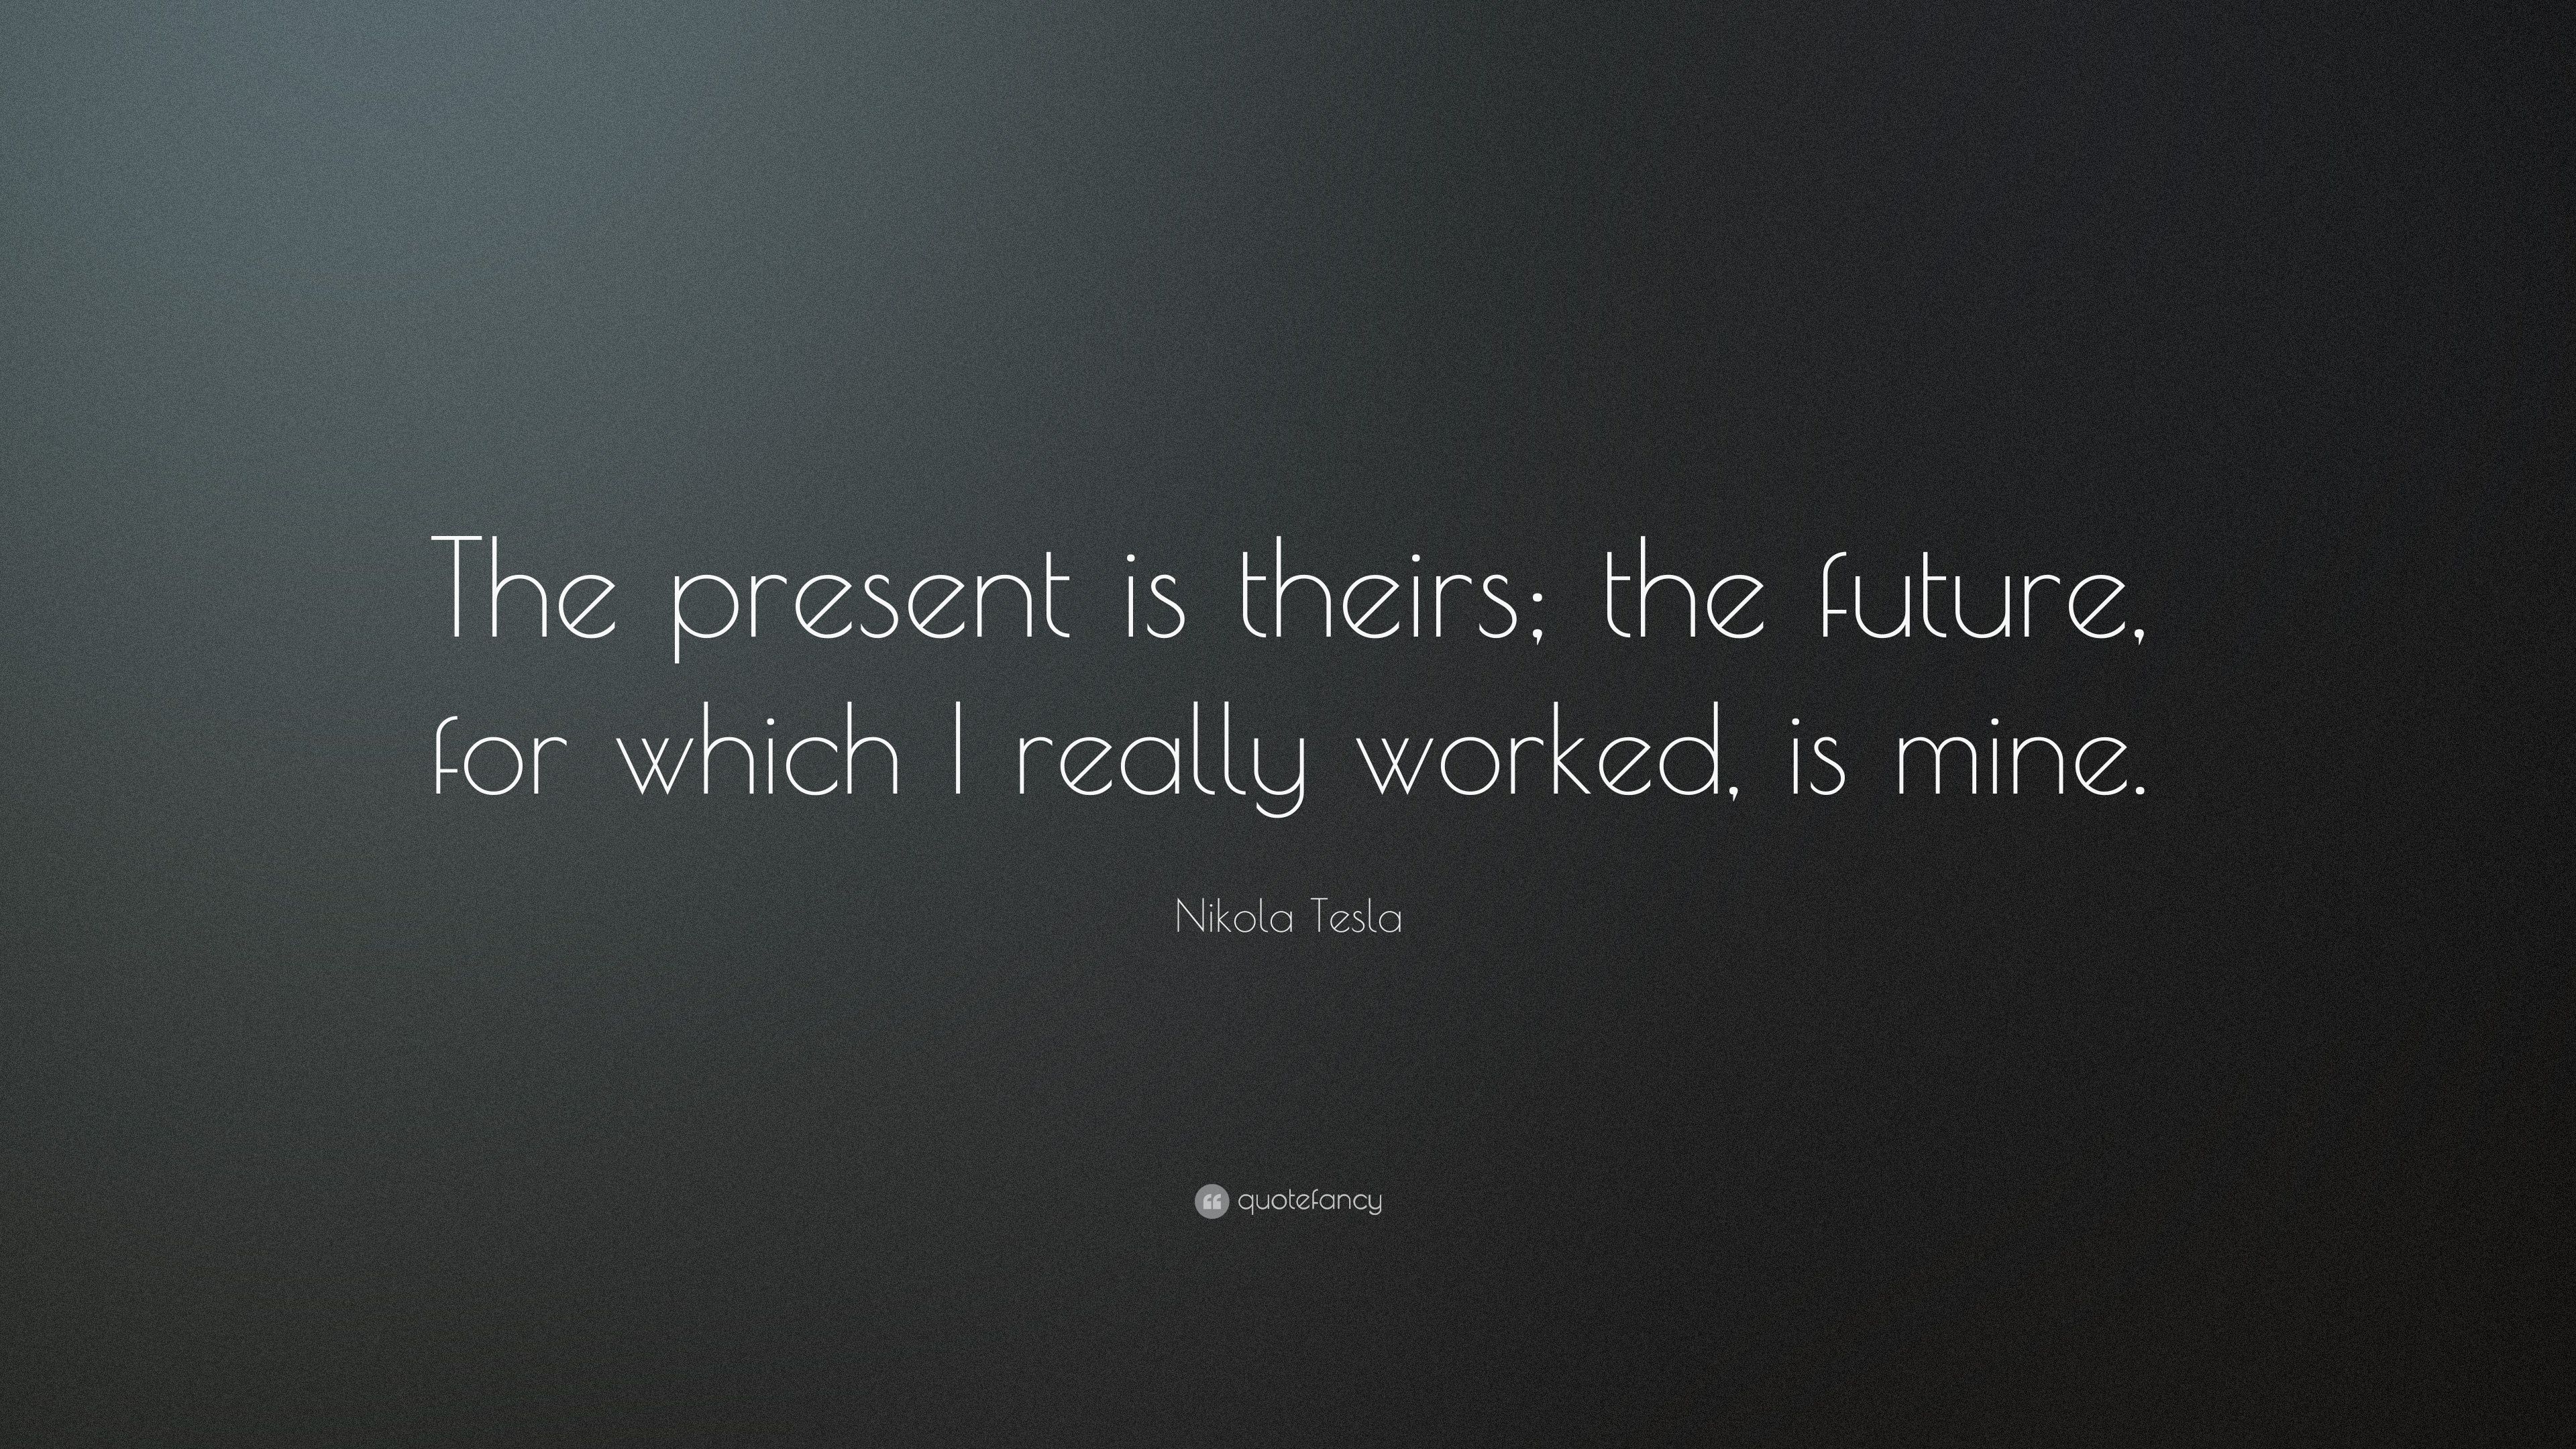 Nikola Tesla Quote: “The present is theirs; the future, for which ...